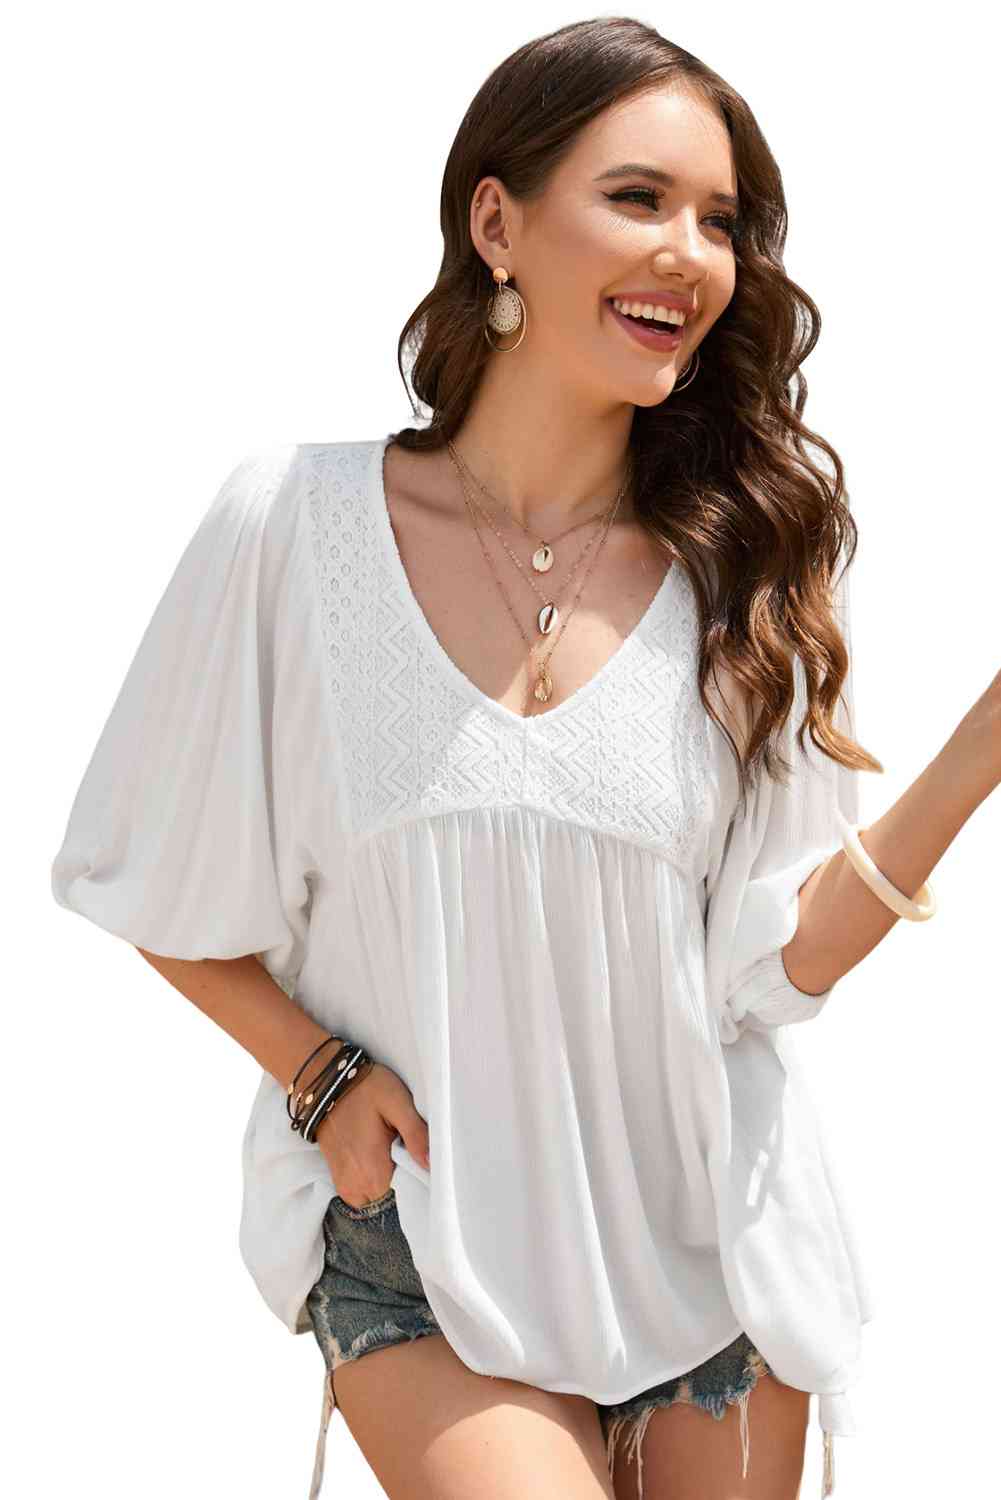 Double Take V-Neck Half Sleeve Blouse with Pockets